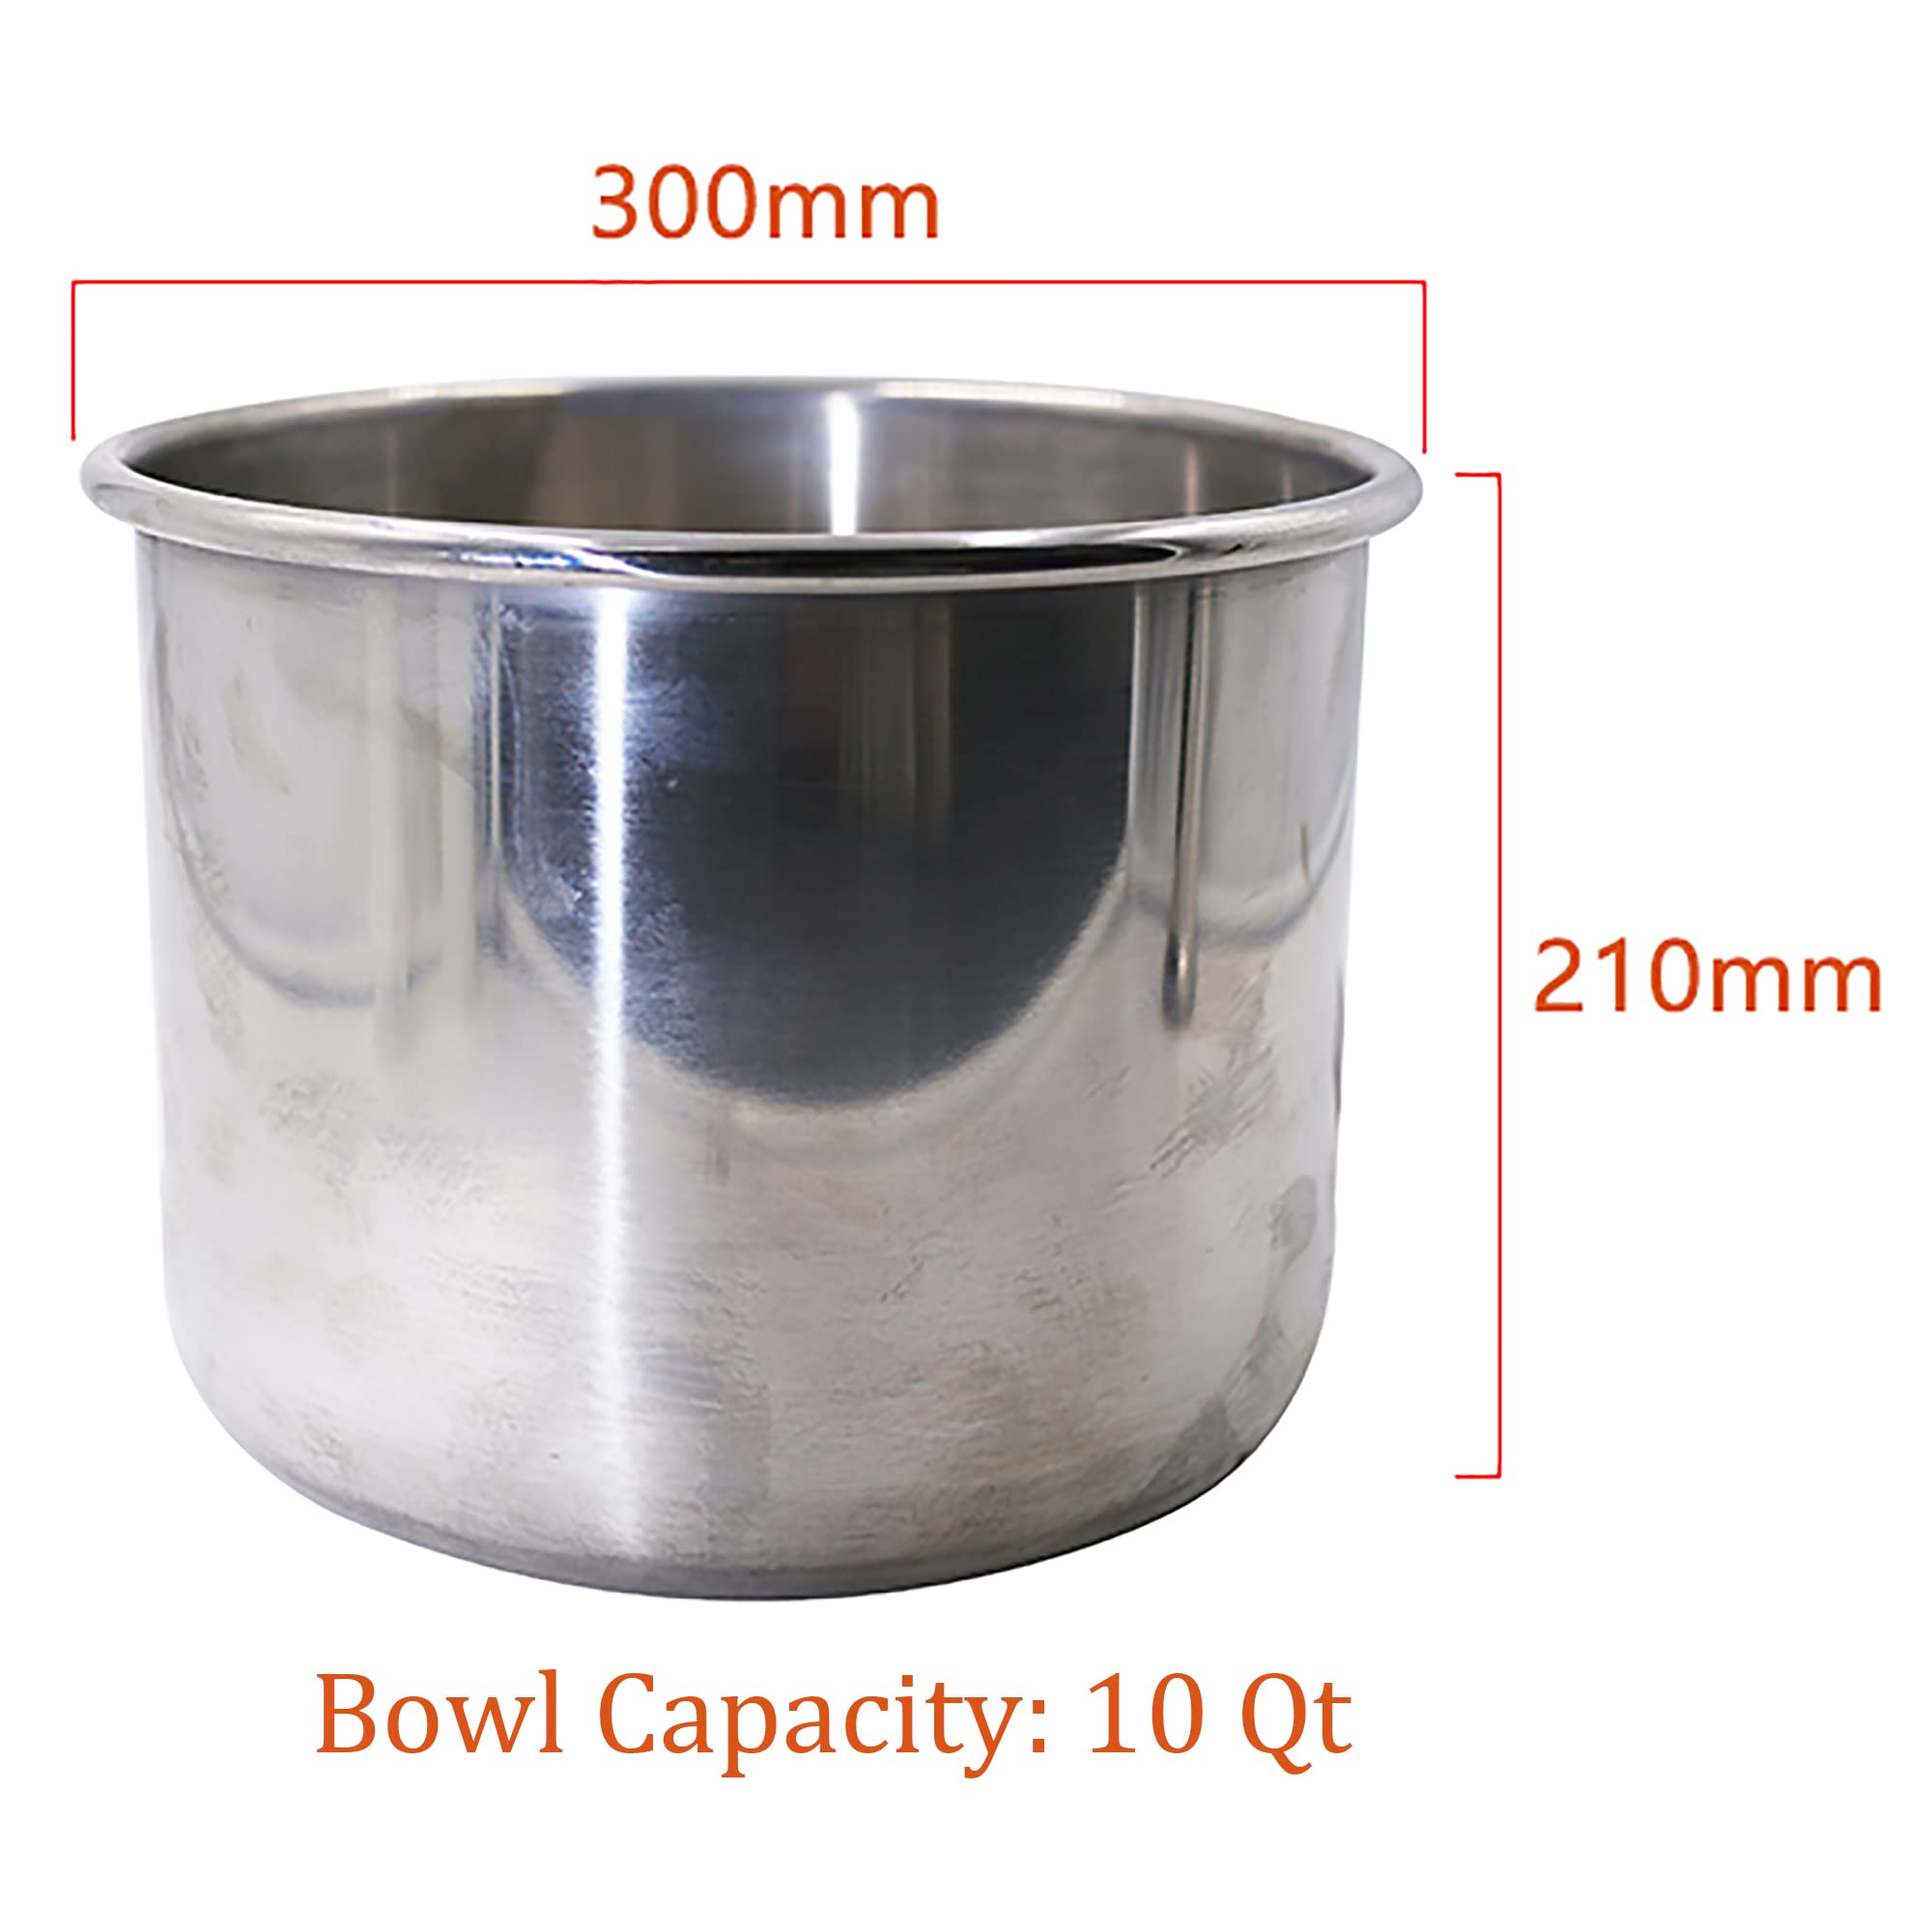 Hakka Commercial Dough Mixer, 10 Qt Spiral Mixer Food Mixer Machine with Food-grade Stainless Steel Bowl, Security Shield & Timer